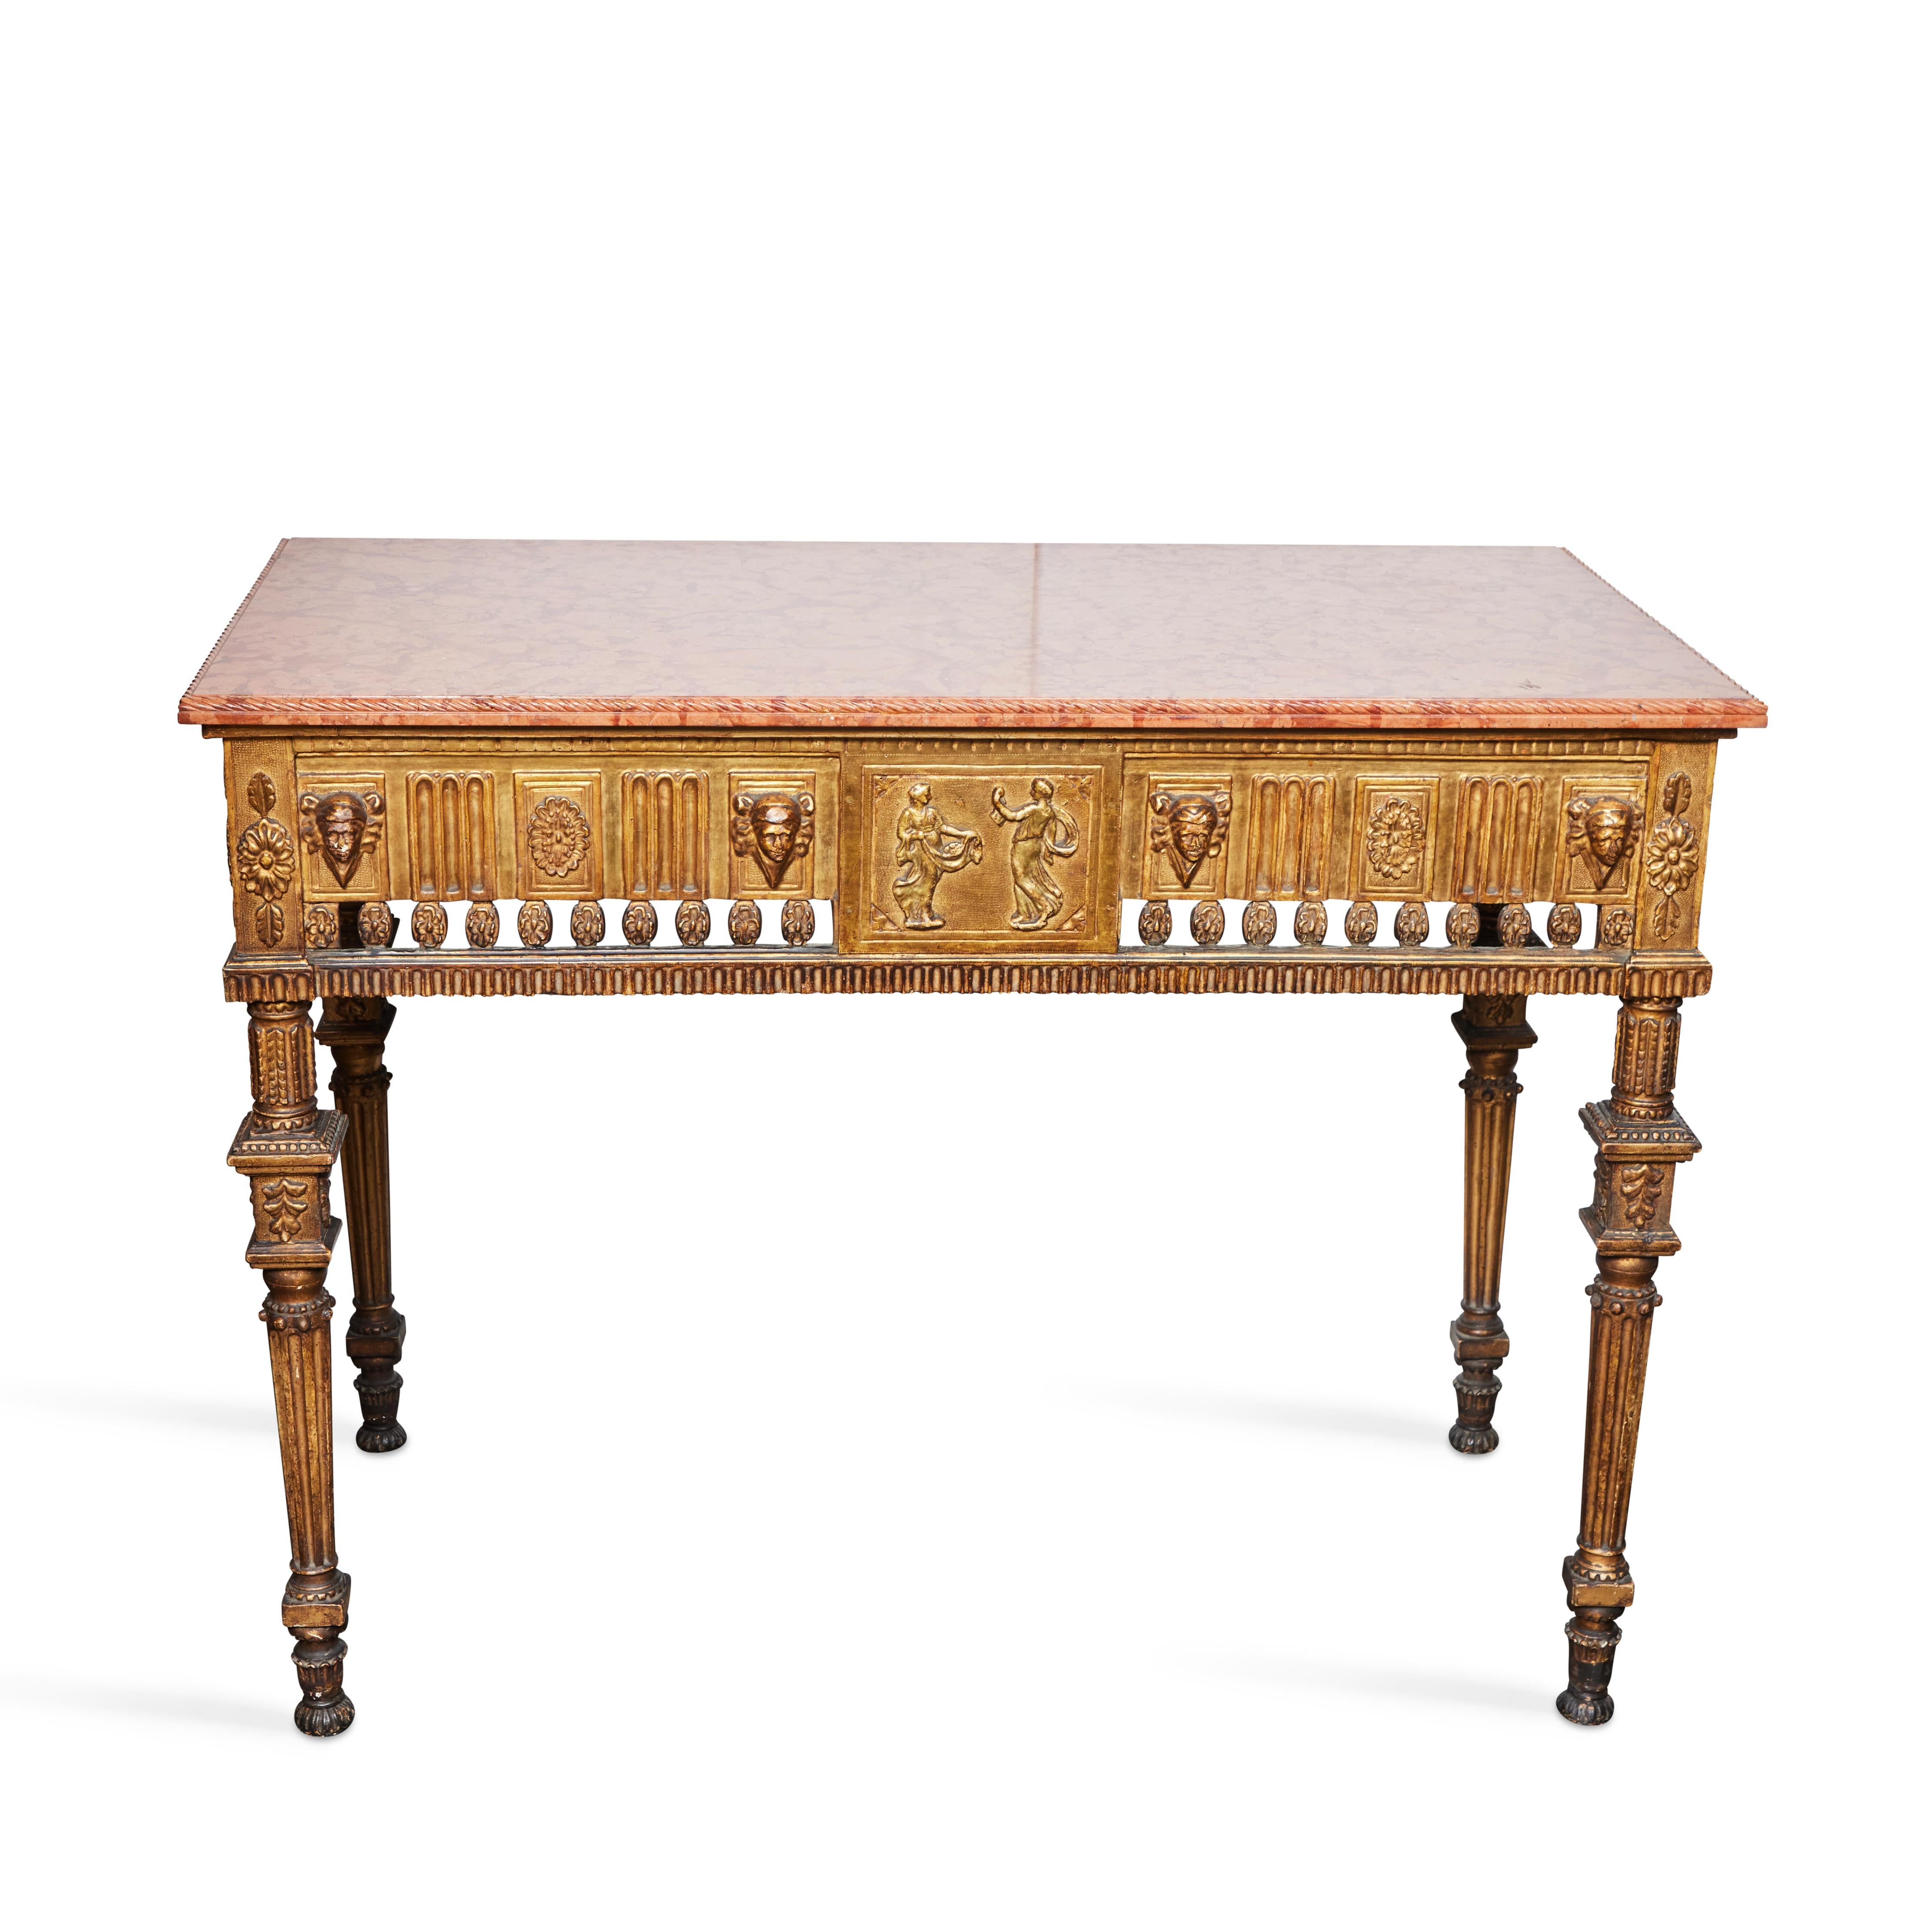 Neoclassical hand carved, gilt wood console with a polished rouge marble top.   The marble top has a carved molded edge, the frieze relief is carved with masks and rosettes and a pierced border of rosettes, flanking a central panel with a pair of